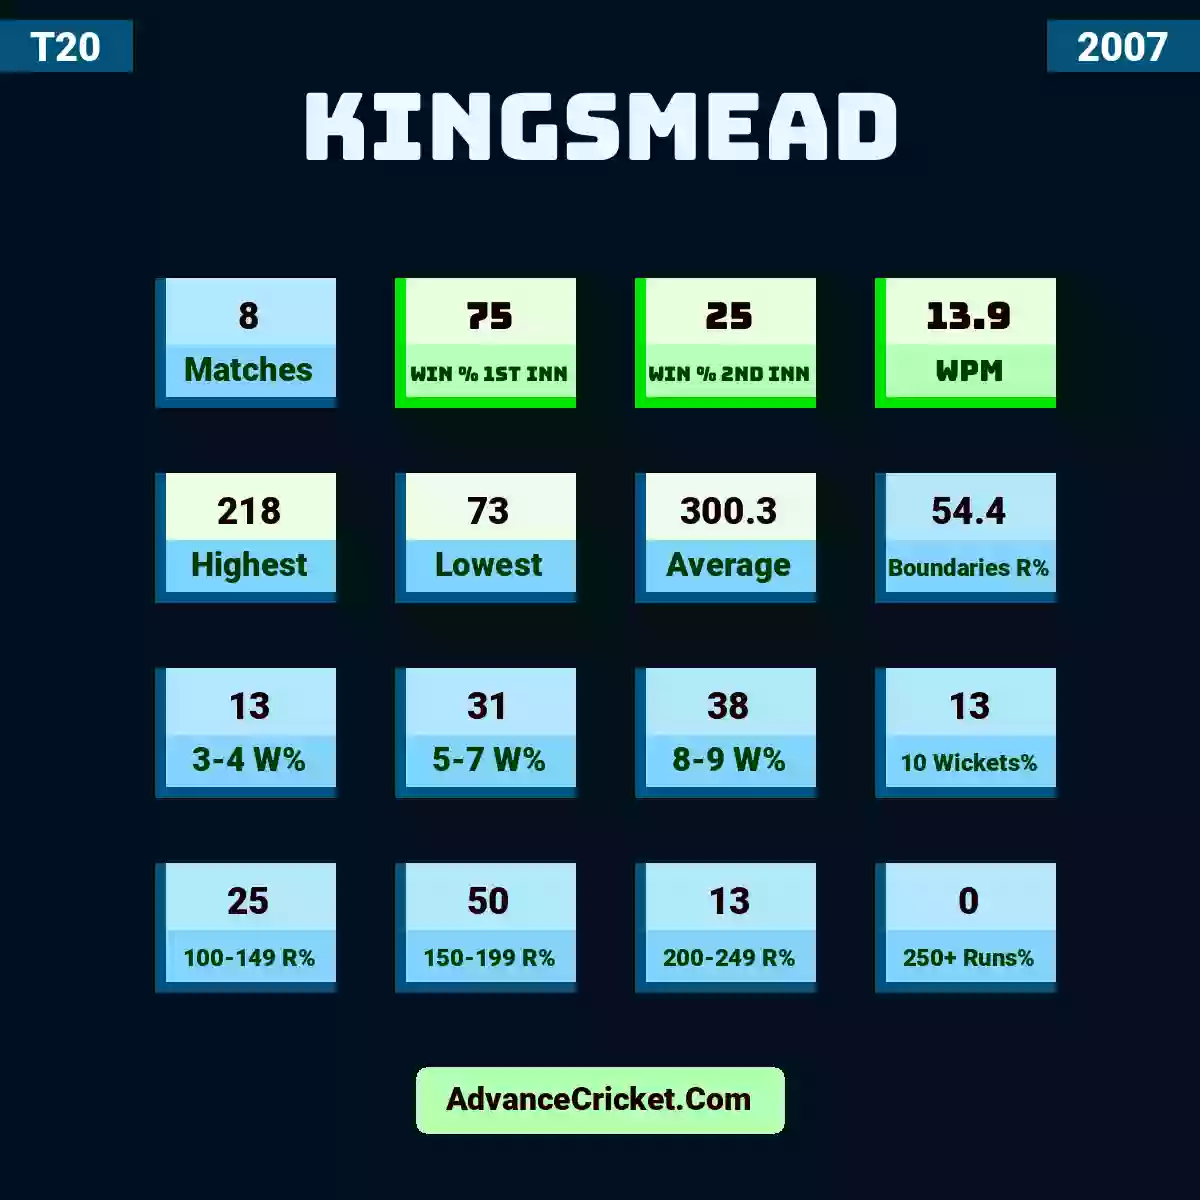 Image showing Kingsmead with Matches: 8, Win % 1st Inn: 75, Win % 2nd Inn: 25, WPM: 13.9, Highest: 218, Lowest: 73, Average: 300.3, Boundaries R%: 54.4, 3-4 W%: 13, 5-7 W%: 31, 8-9 W%: 38, 10 Wickets%: 13, 100-149 R%: 25, 150-199 R%: 50, 200-249 R%: 13, 250+ Runs%: 0.